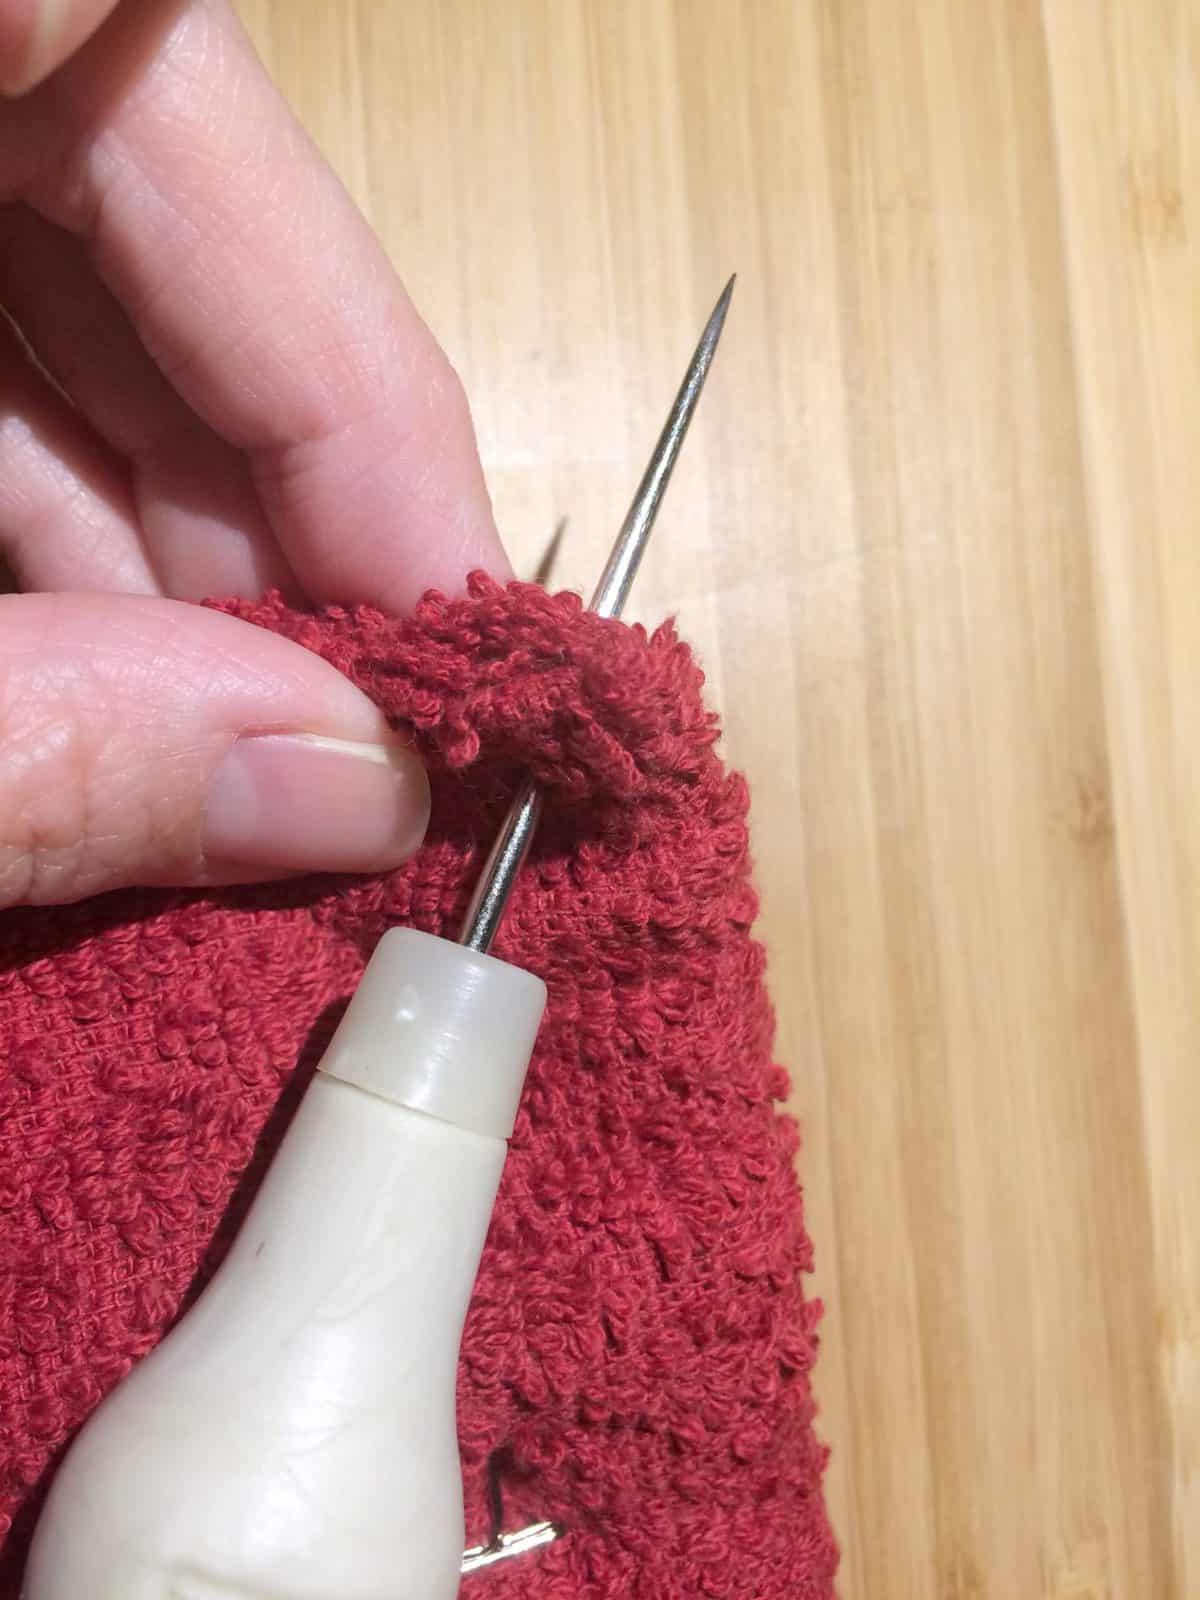 Use awl to punch holes to add crochet towel topper.